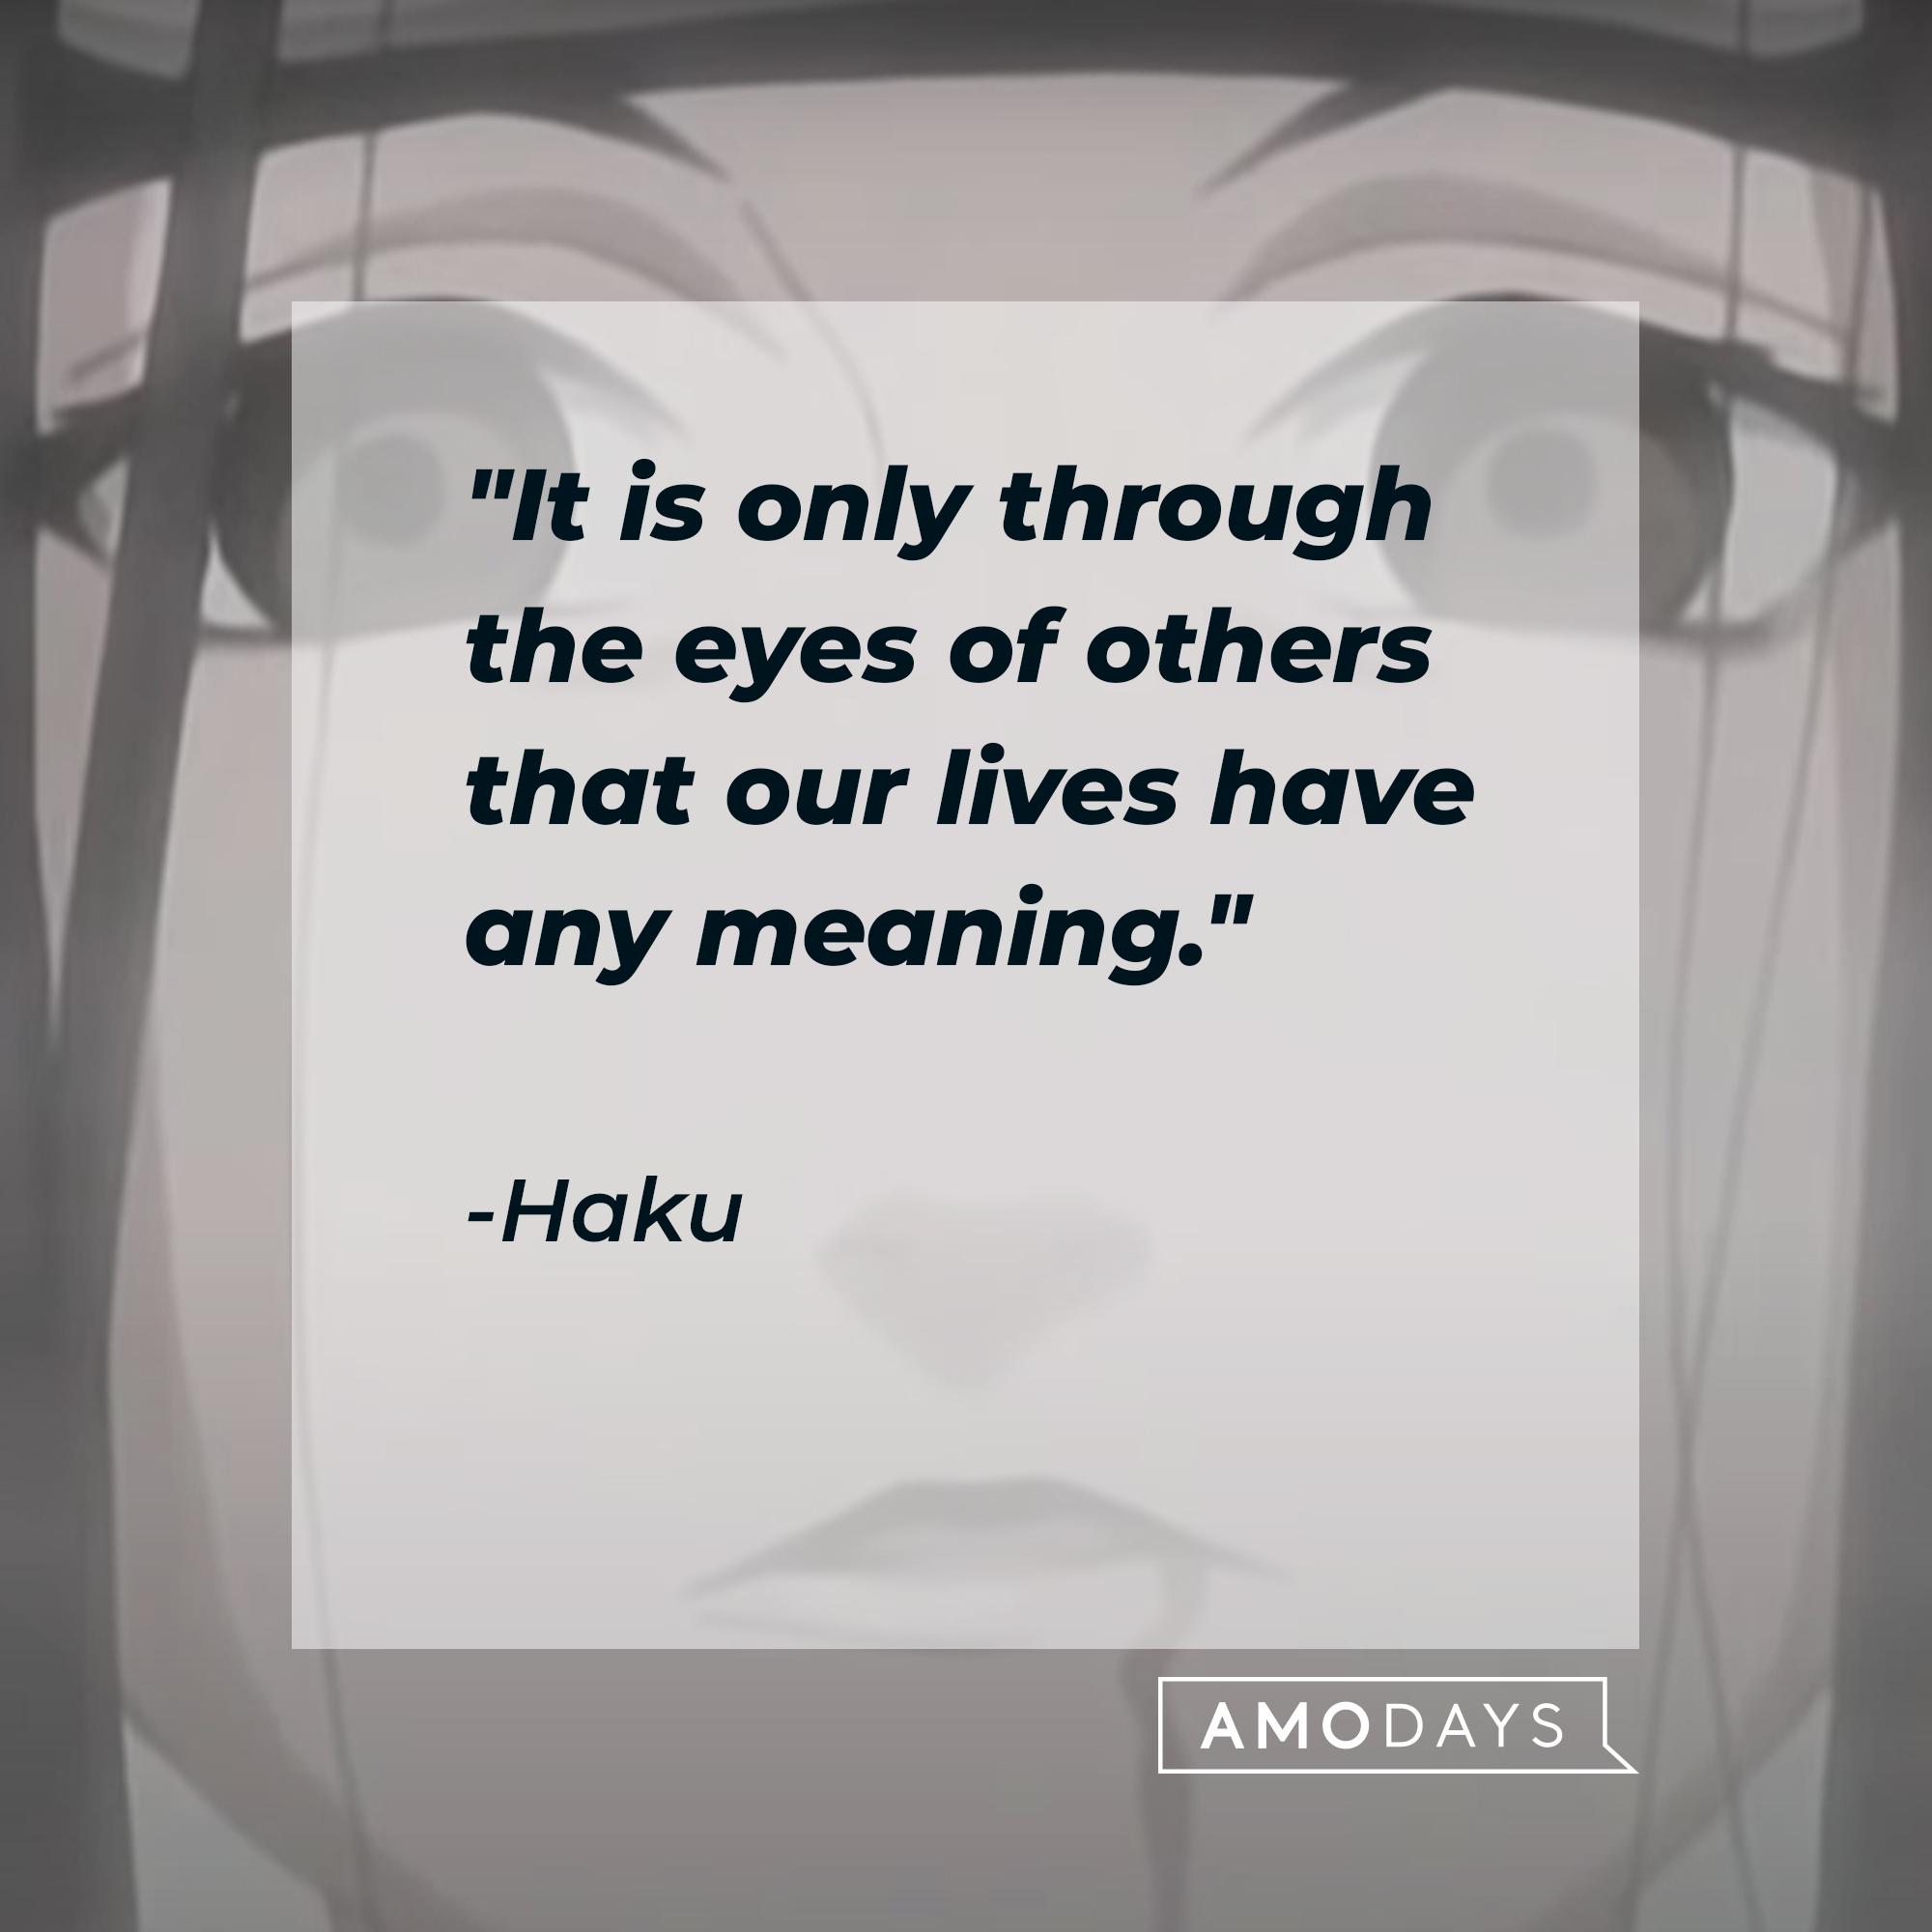 Haku, with his quote: “It is only through the eyes of others that our lives have any meaning.” | Source: facebook.com/narutoofficialsns